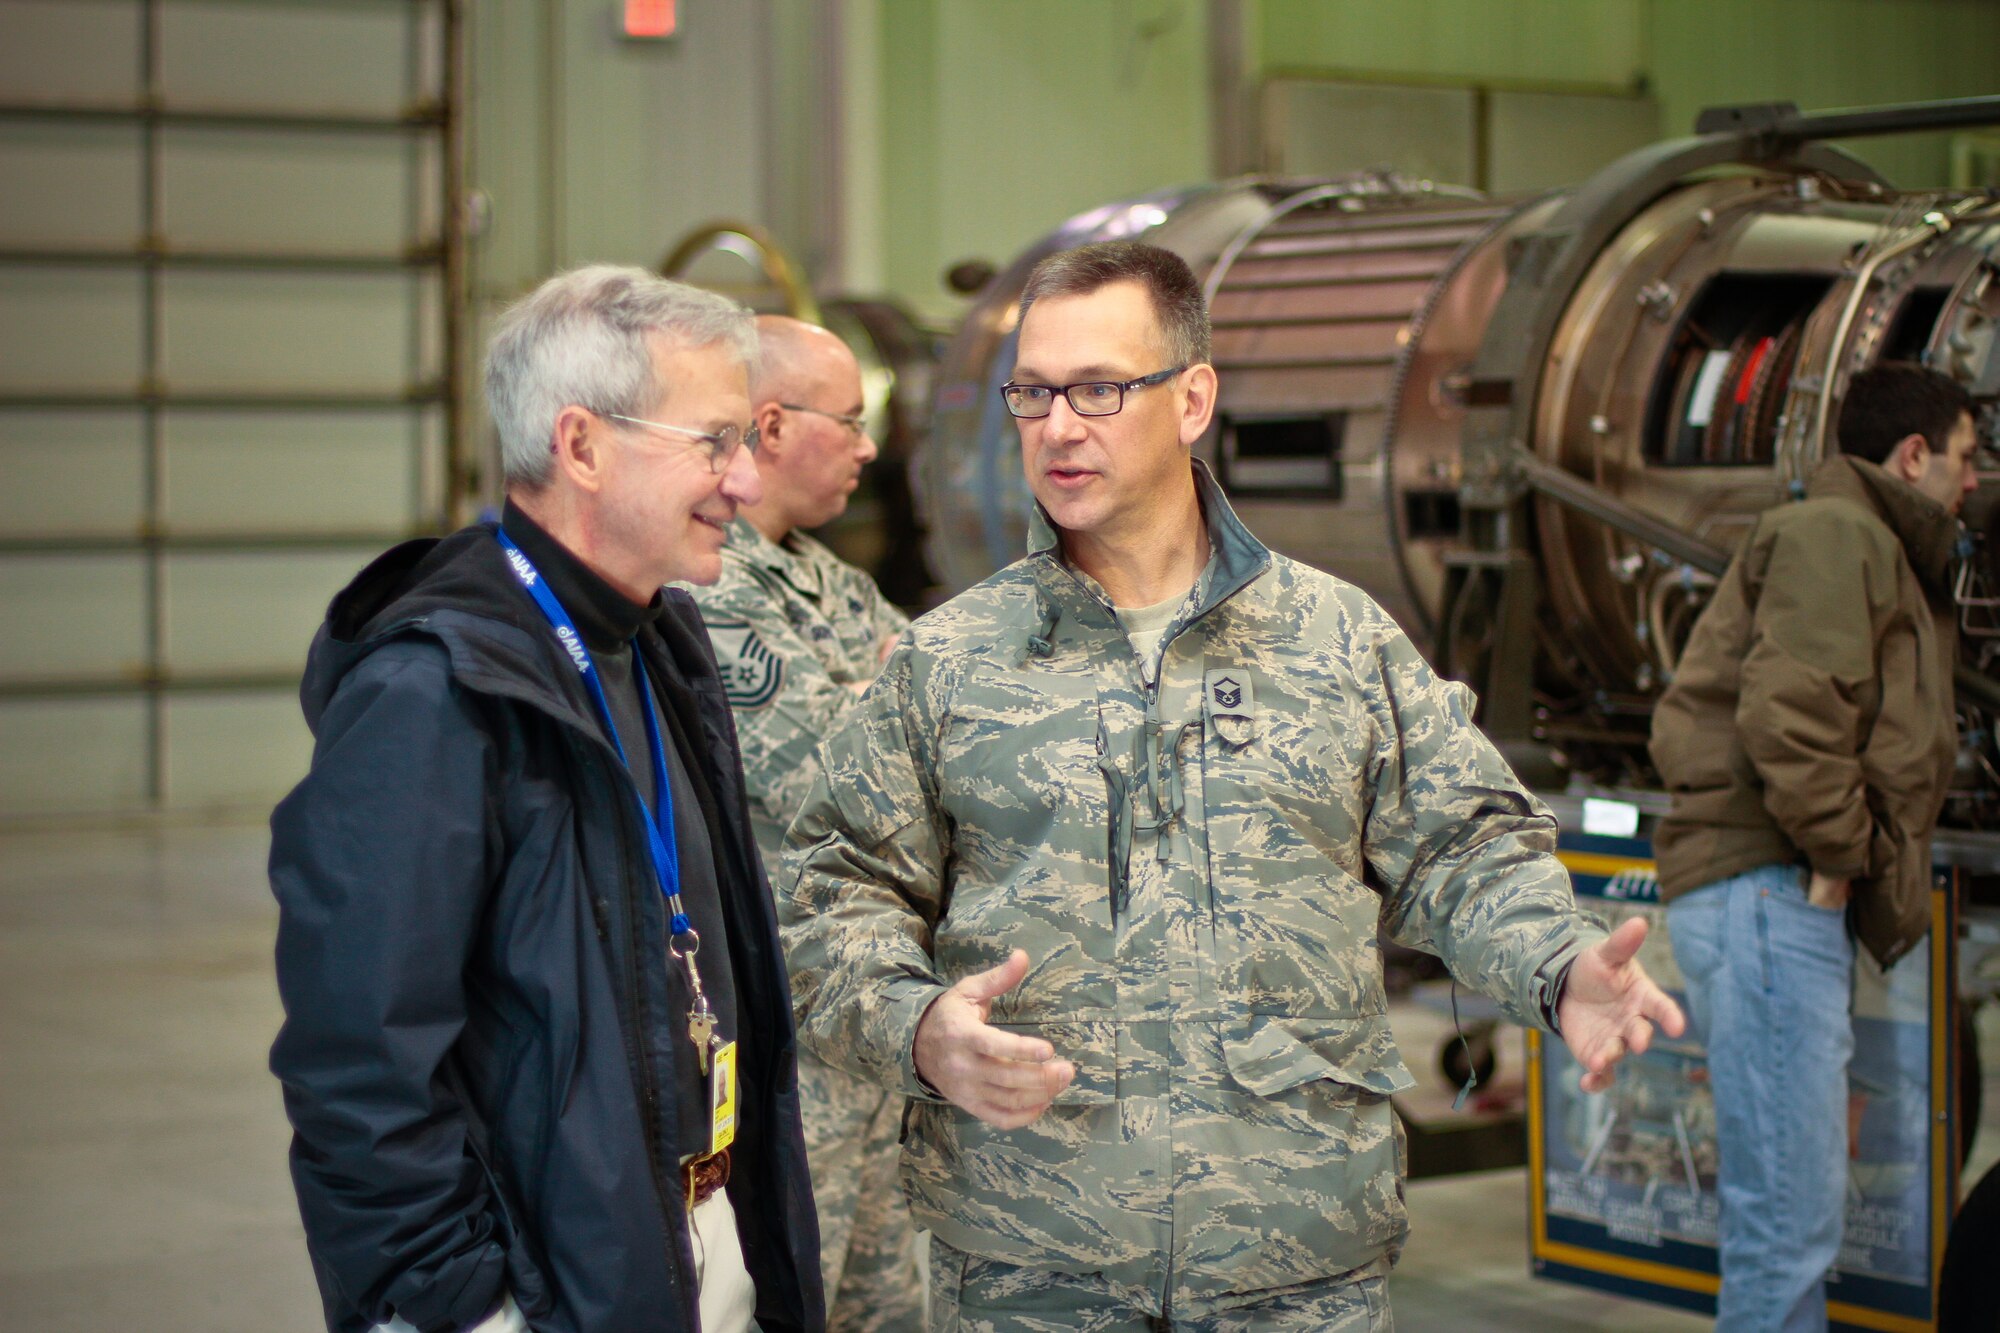 A picture of New Jersey Air National Guard Master Sgt. Andrew Moseley talking to aeronautical engineering professor Dr. Terry Hart.